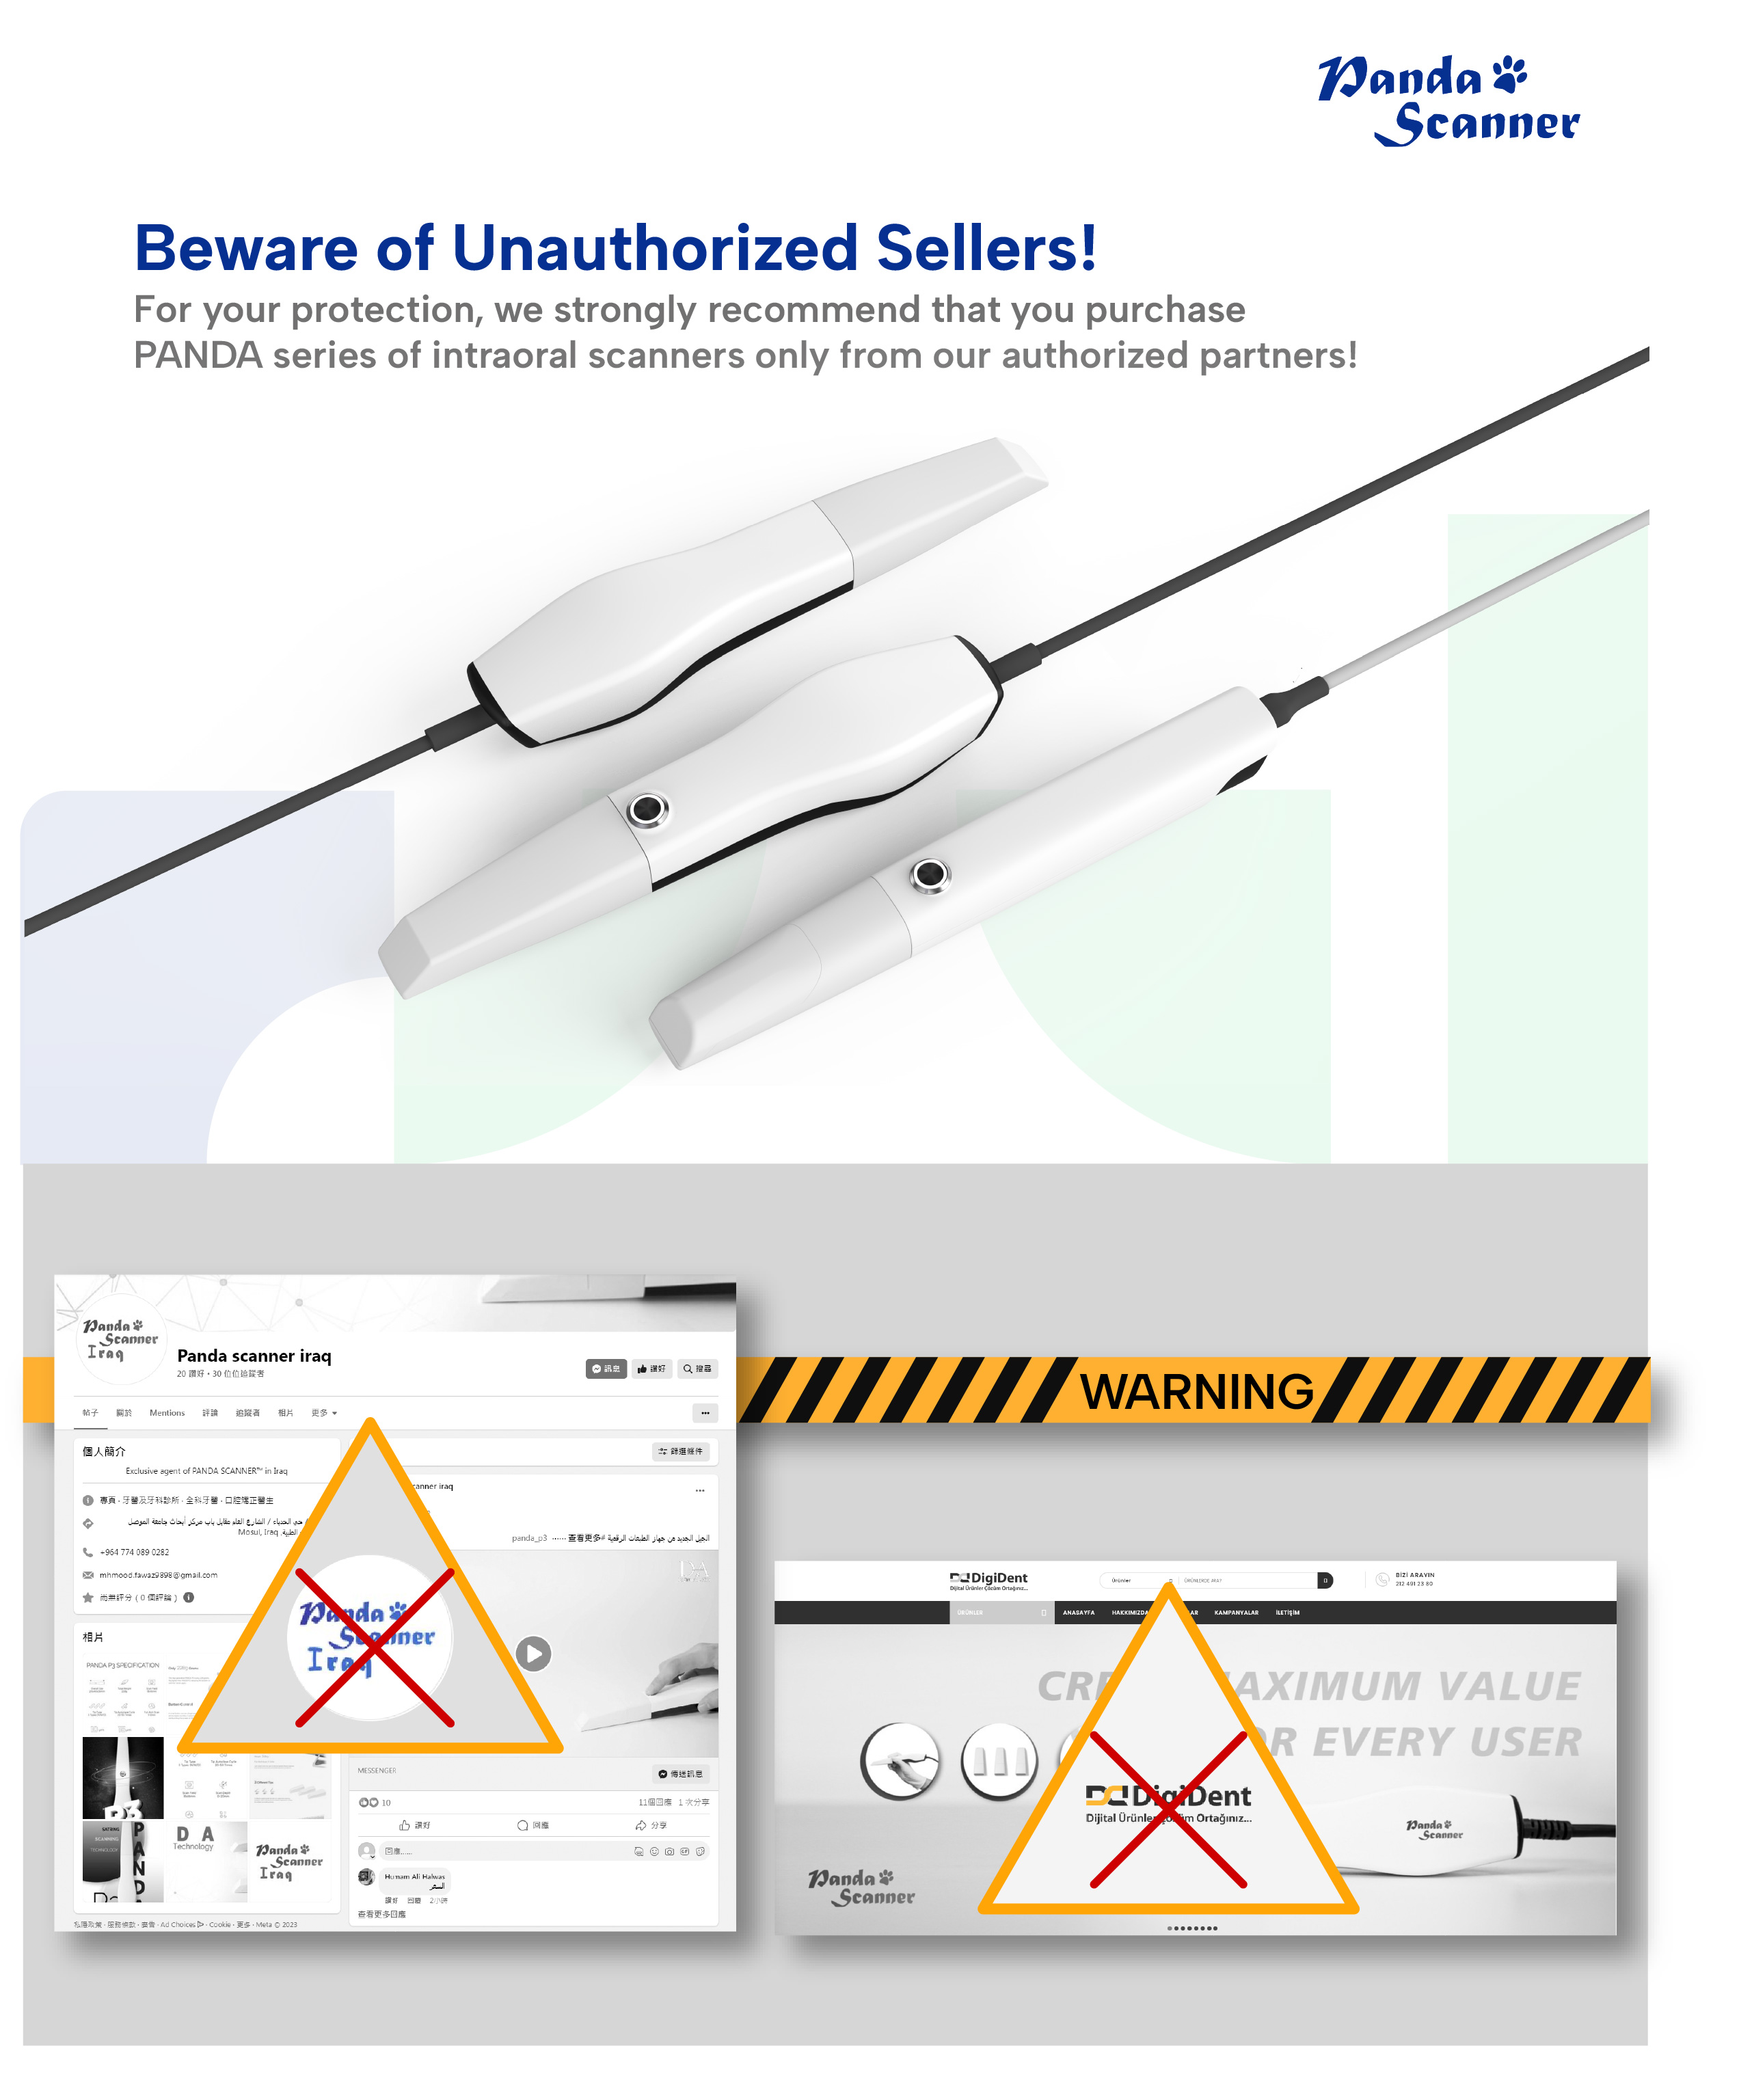 Beware of Unauthorized Sellers!